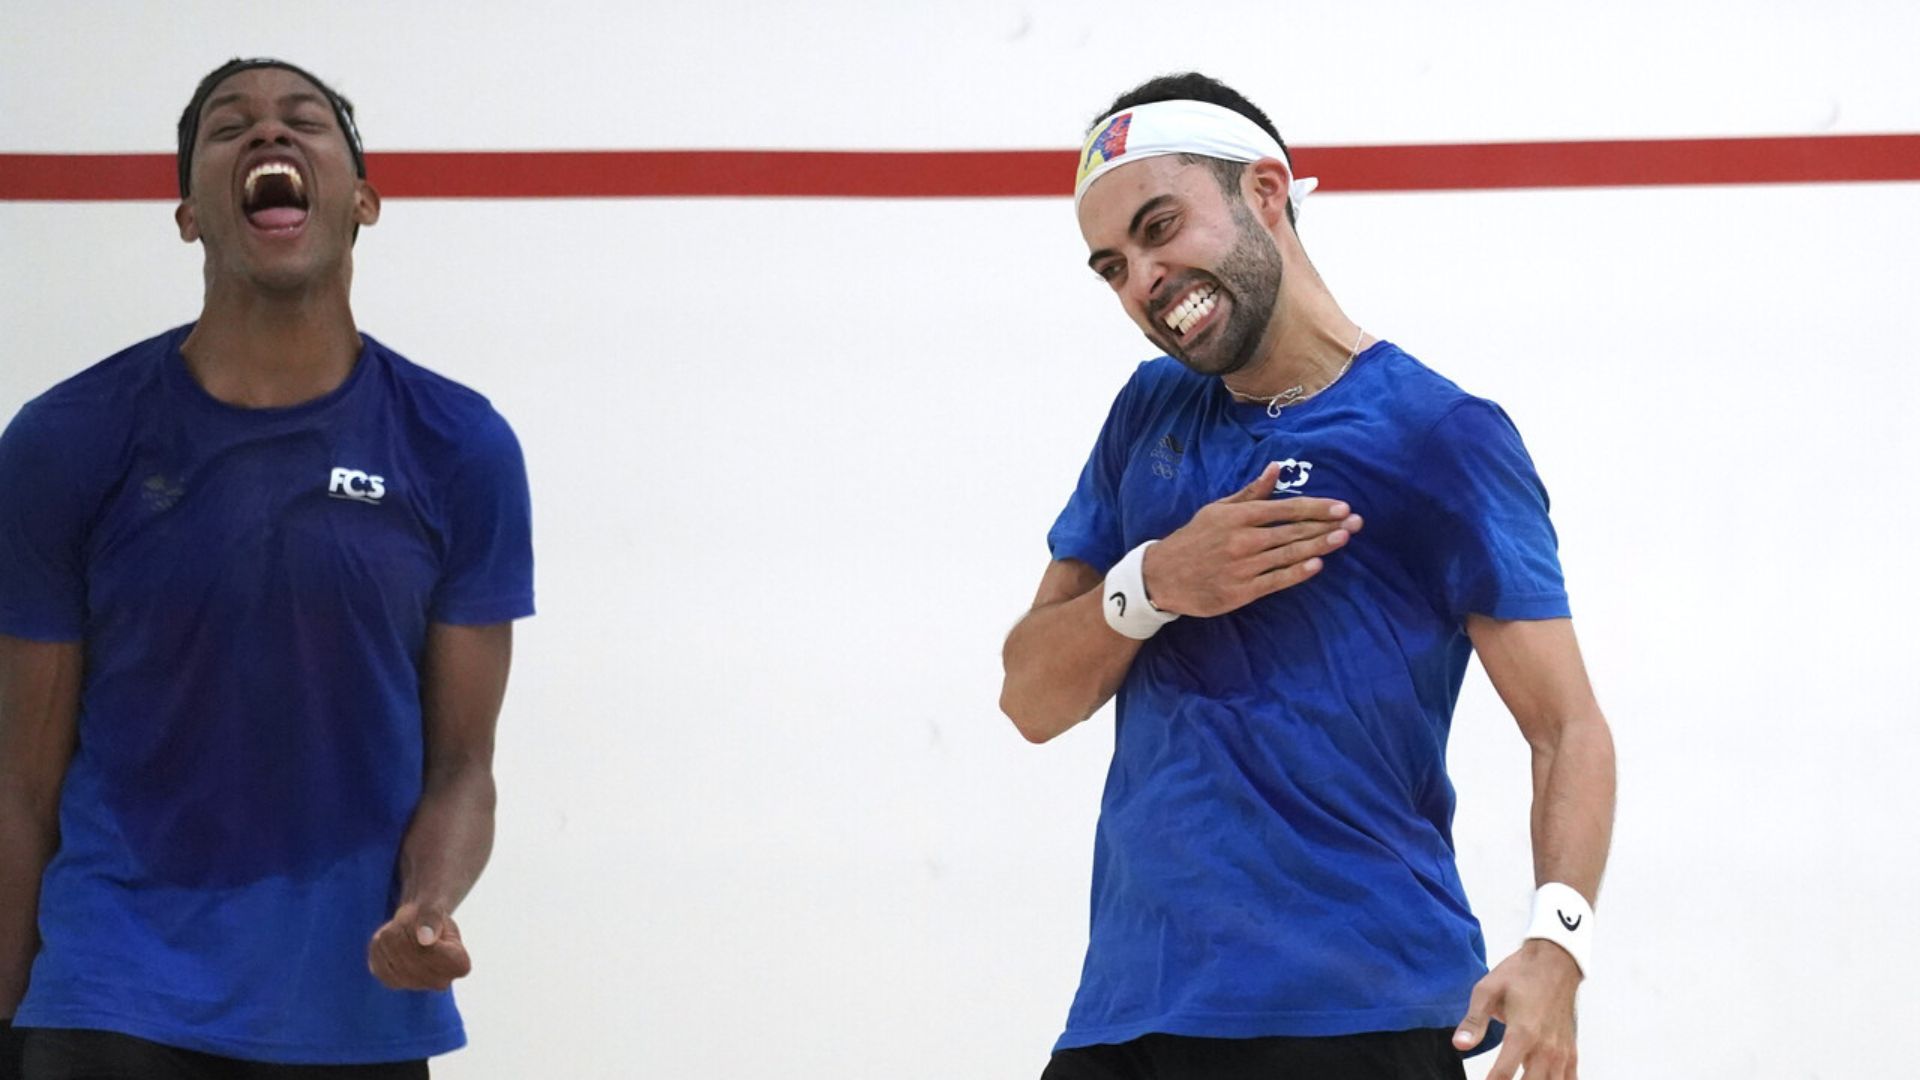 Colombia Wins Gold and Strengthens Its Medal Standings Thanks to Squash